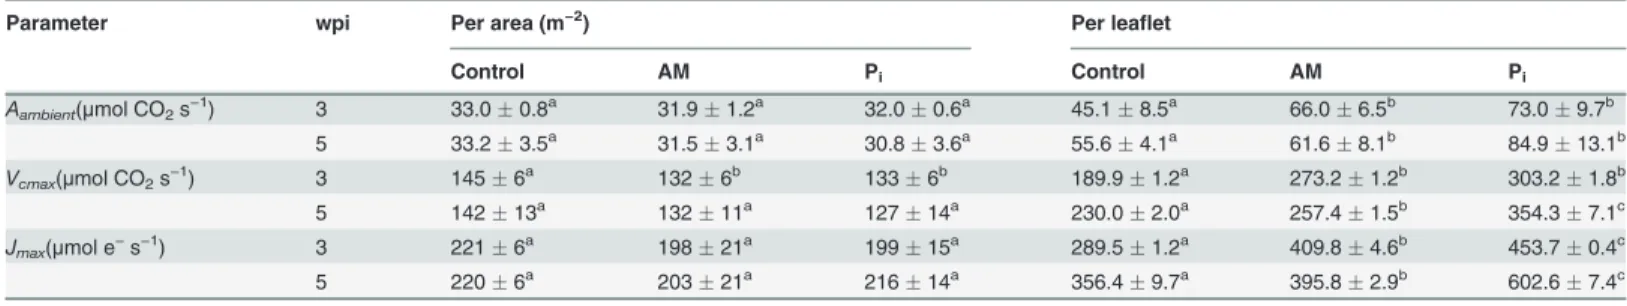 Table 4. The photosynthetic parameters of leaves from control, mycorrhized (AM) and phosphate-fertilized plants (P i ).